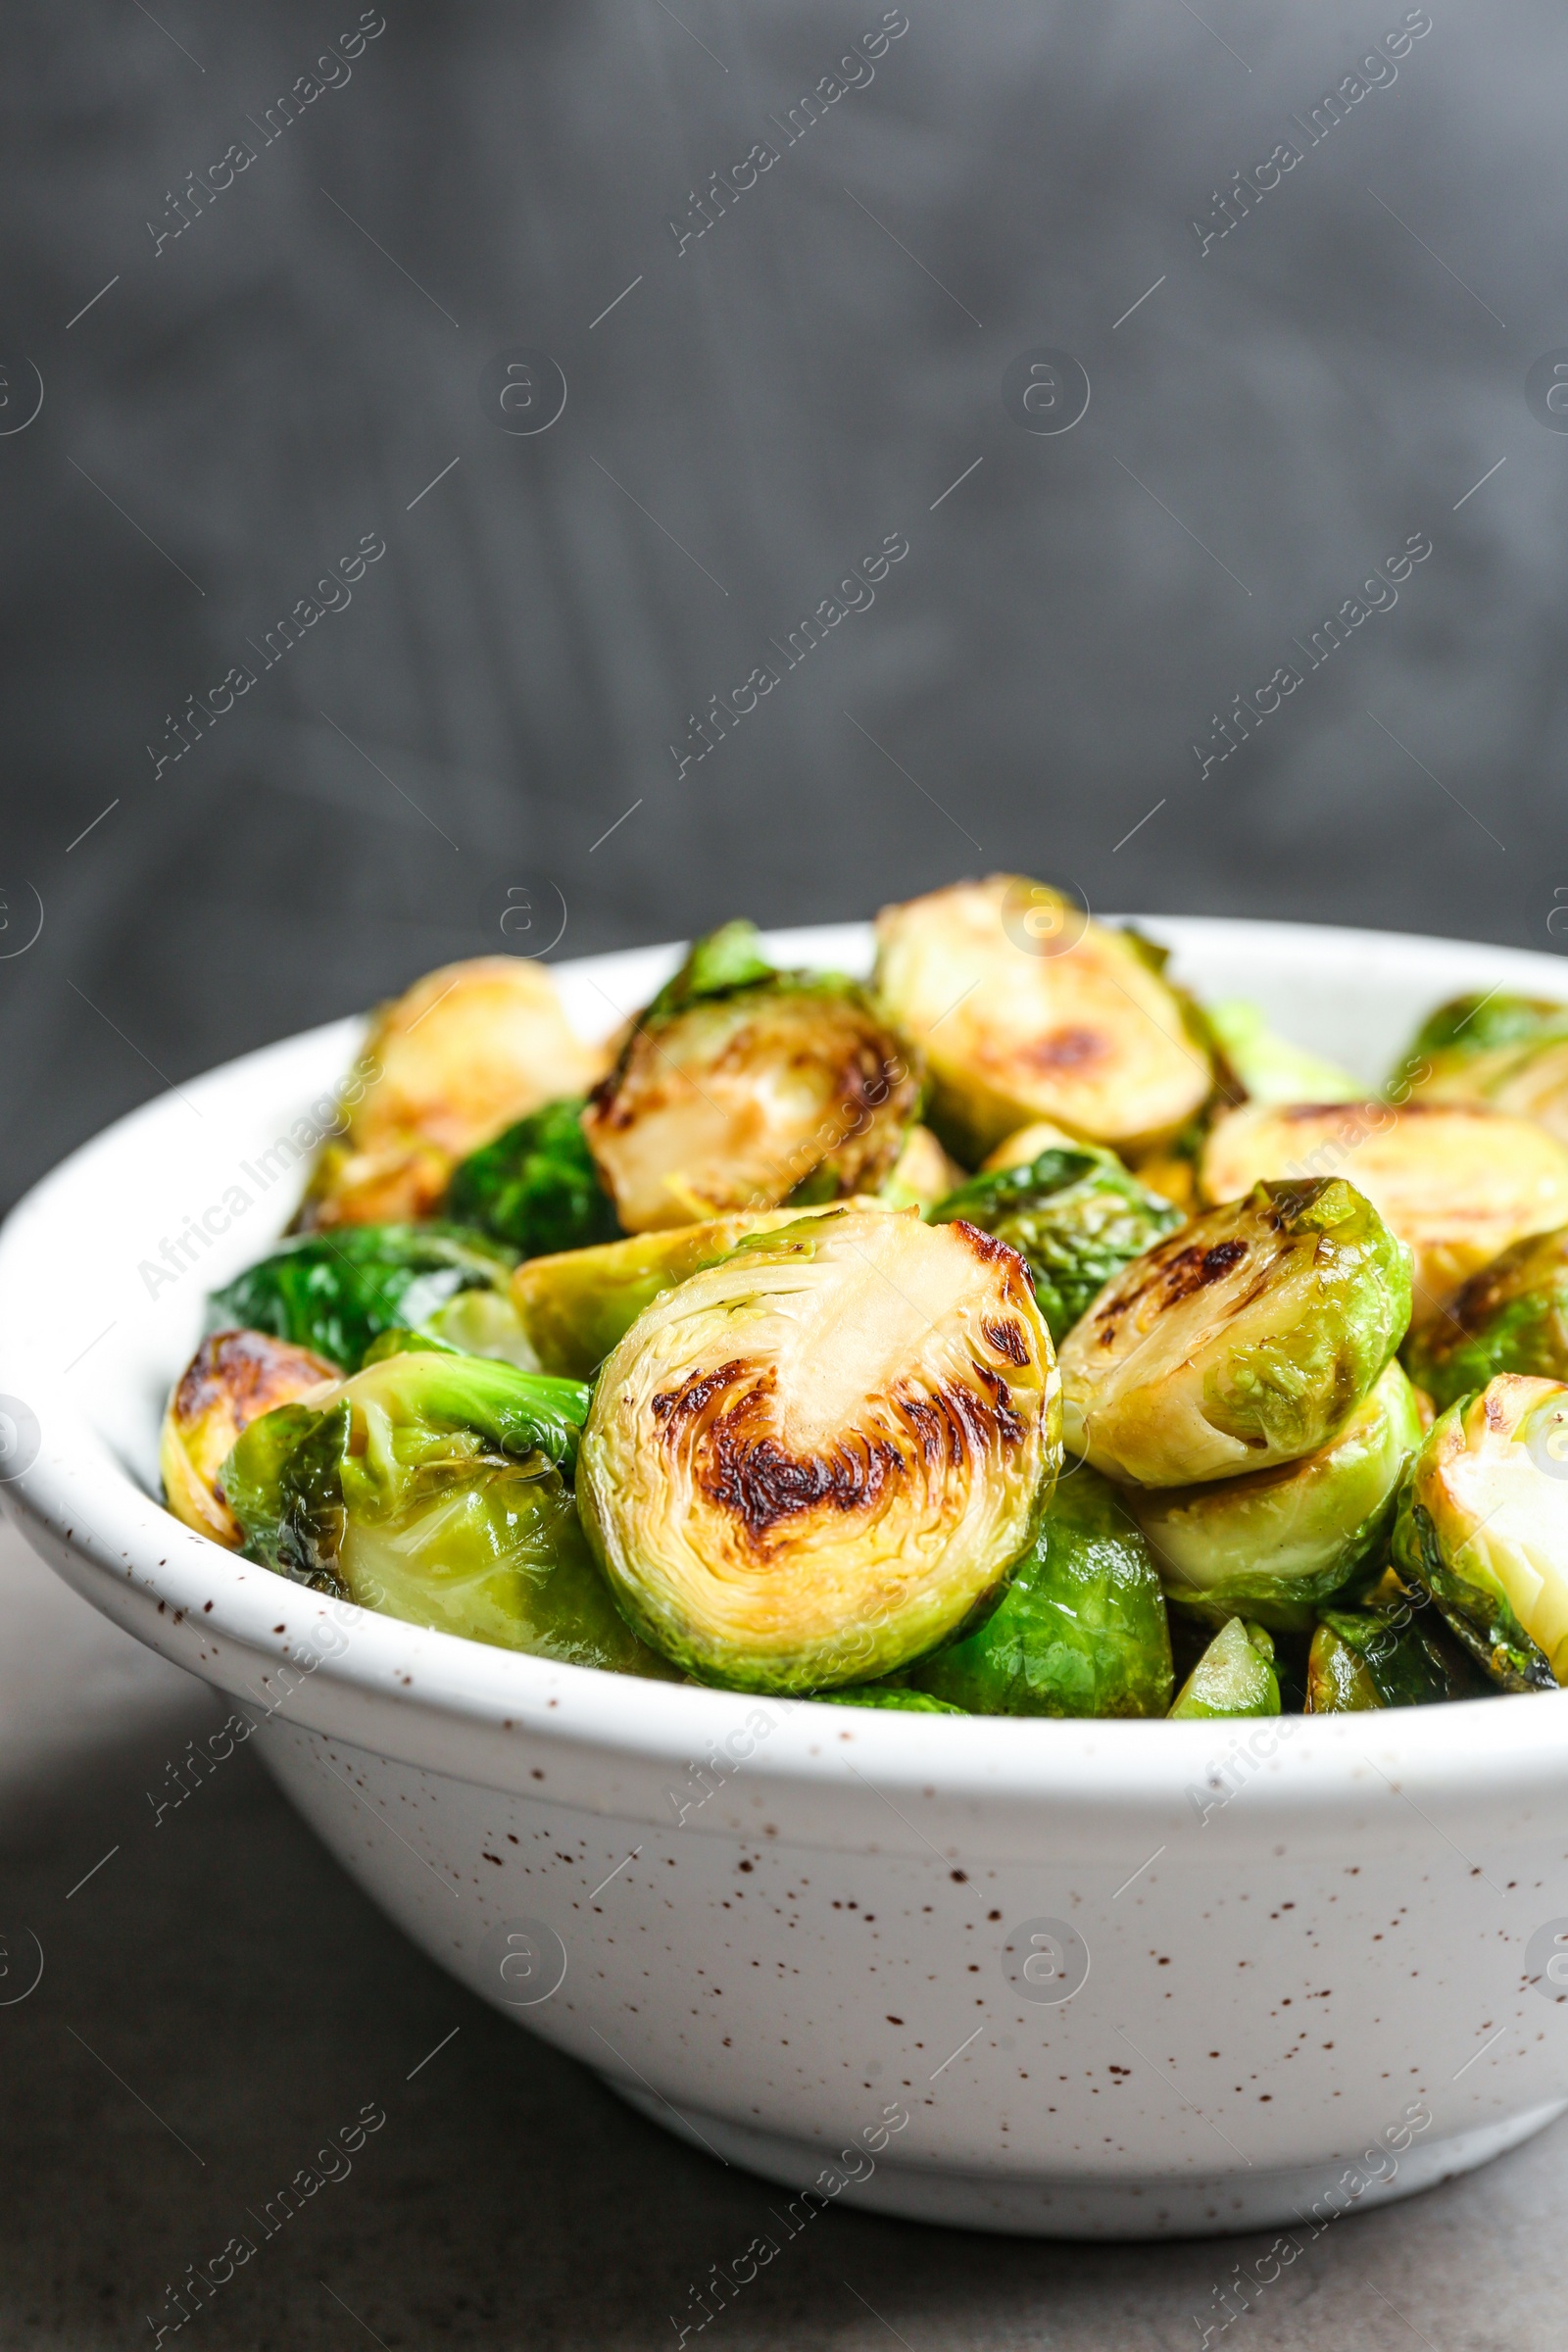 Photo of Roasted Brussels sprouts in bowl on grey table